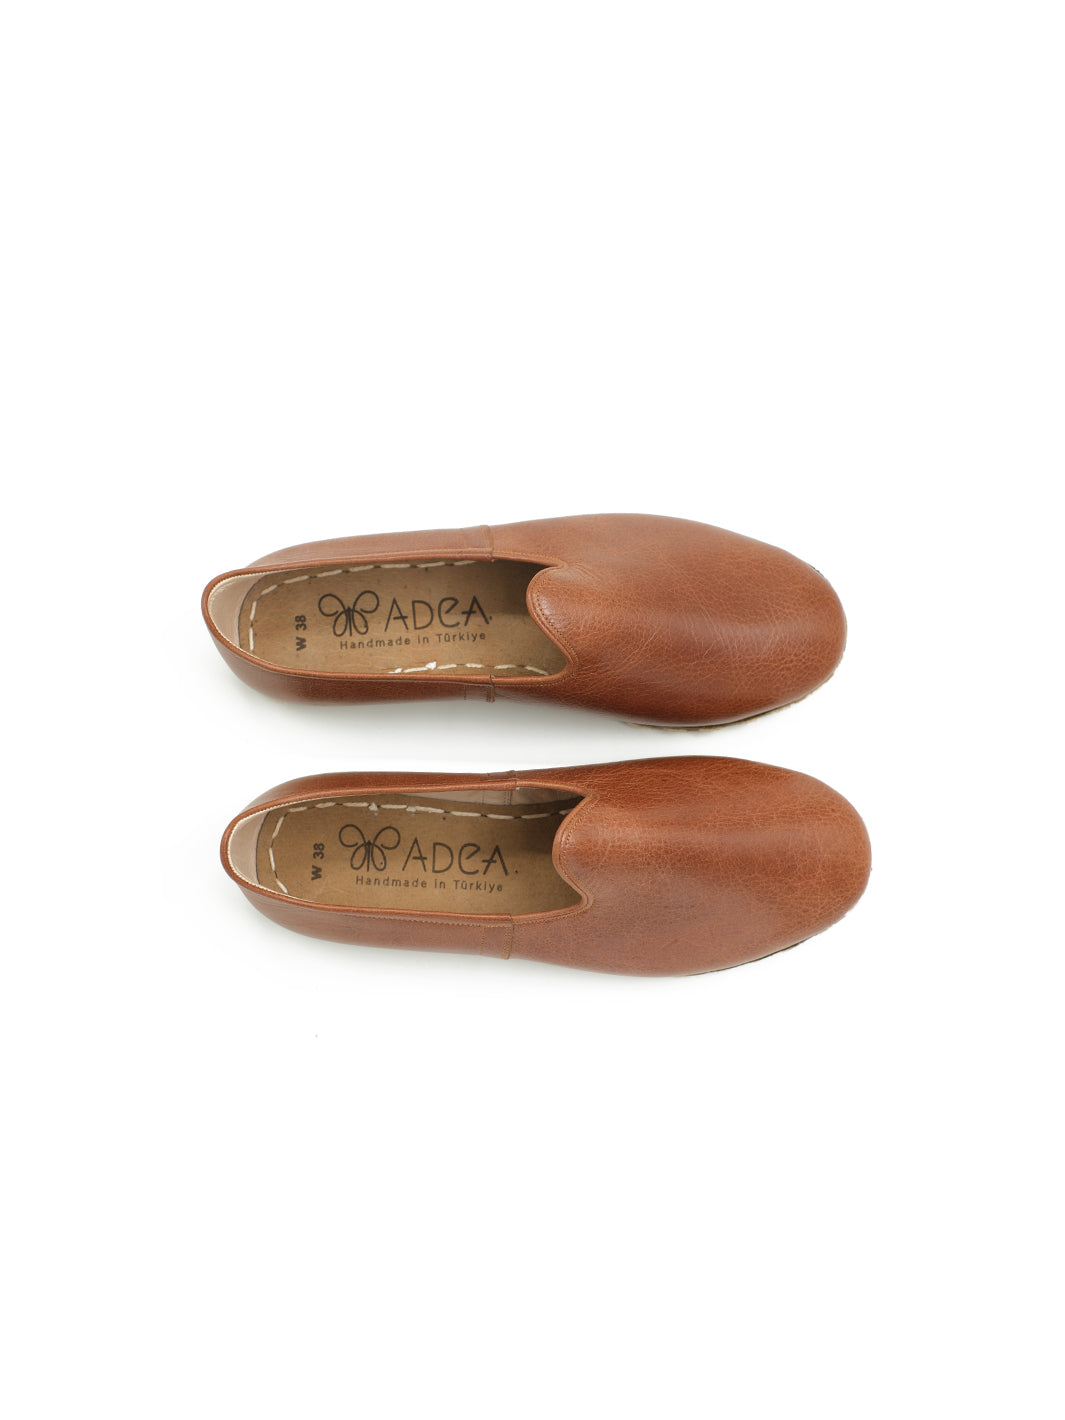 WOMEN'S Toffee Brown SLIP ON SHOES - LEATHER